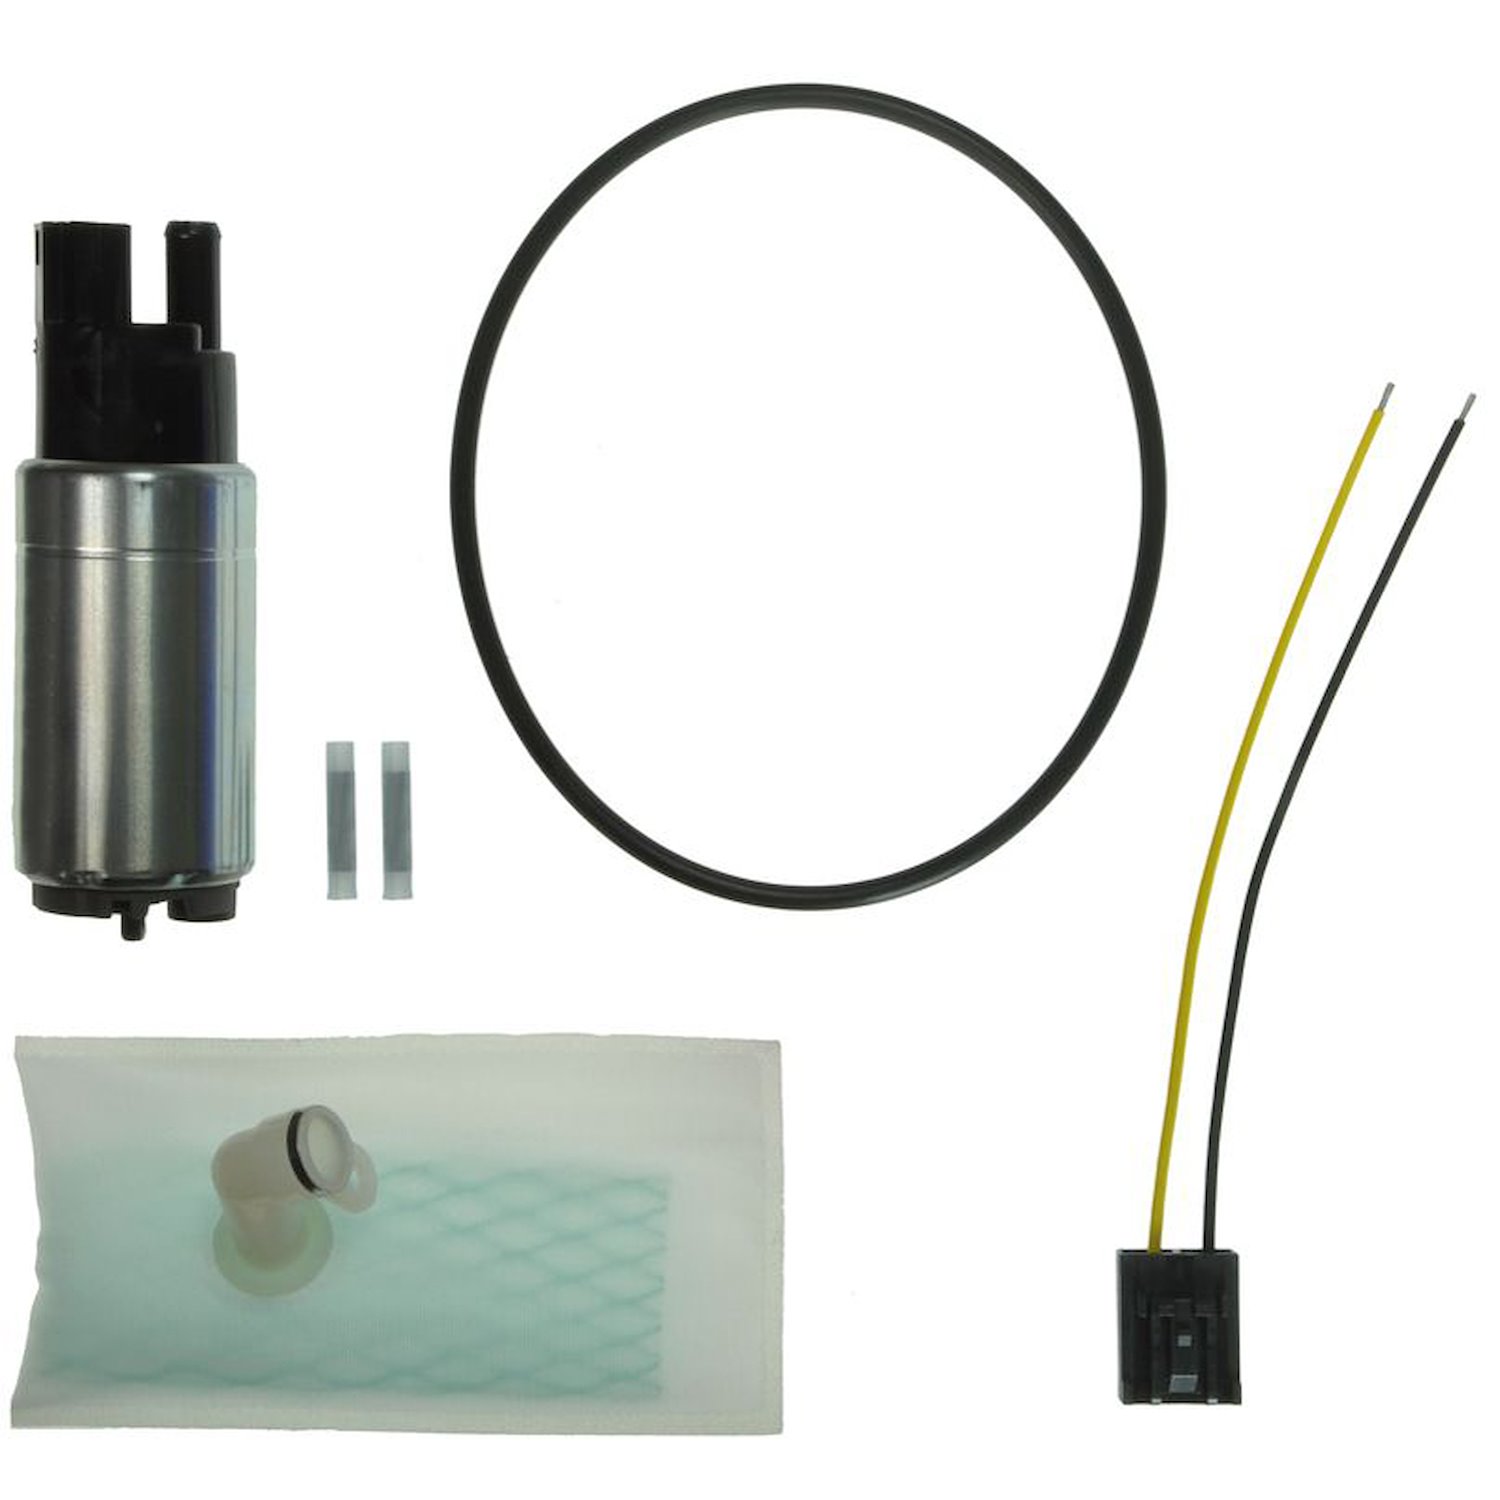 EFI In-Tank Electric Fuel Pump And Strainer Set for 1999-2004/2000-2004 Nissan Xterra